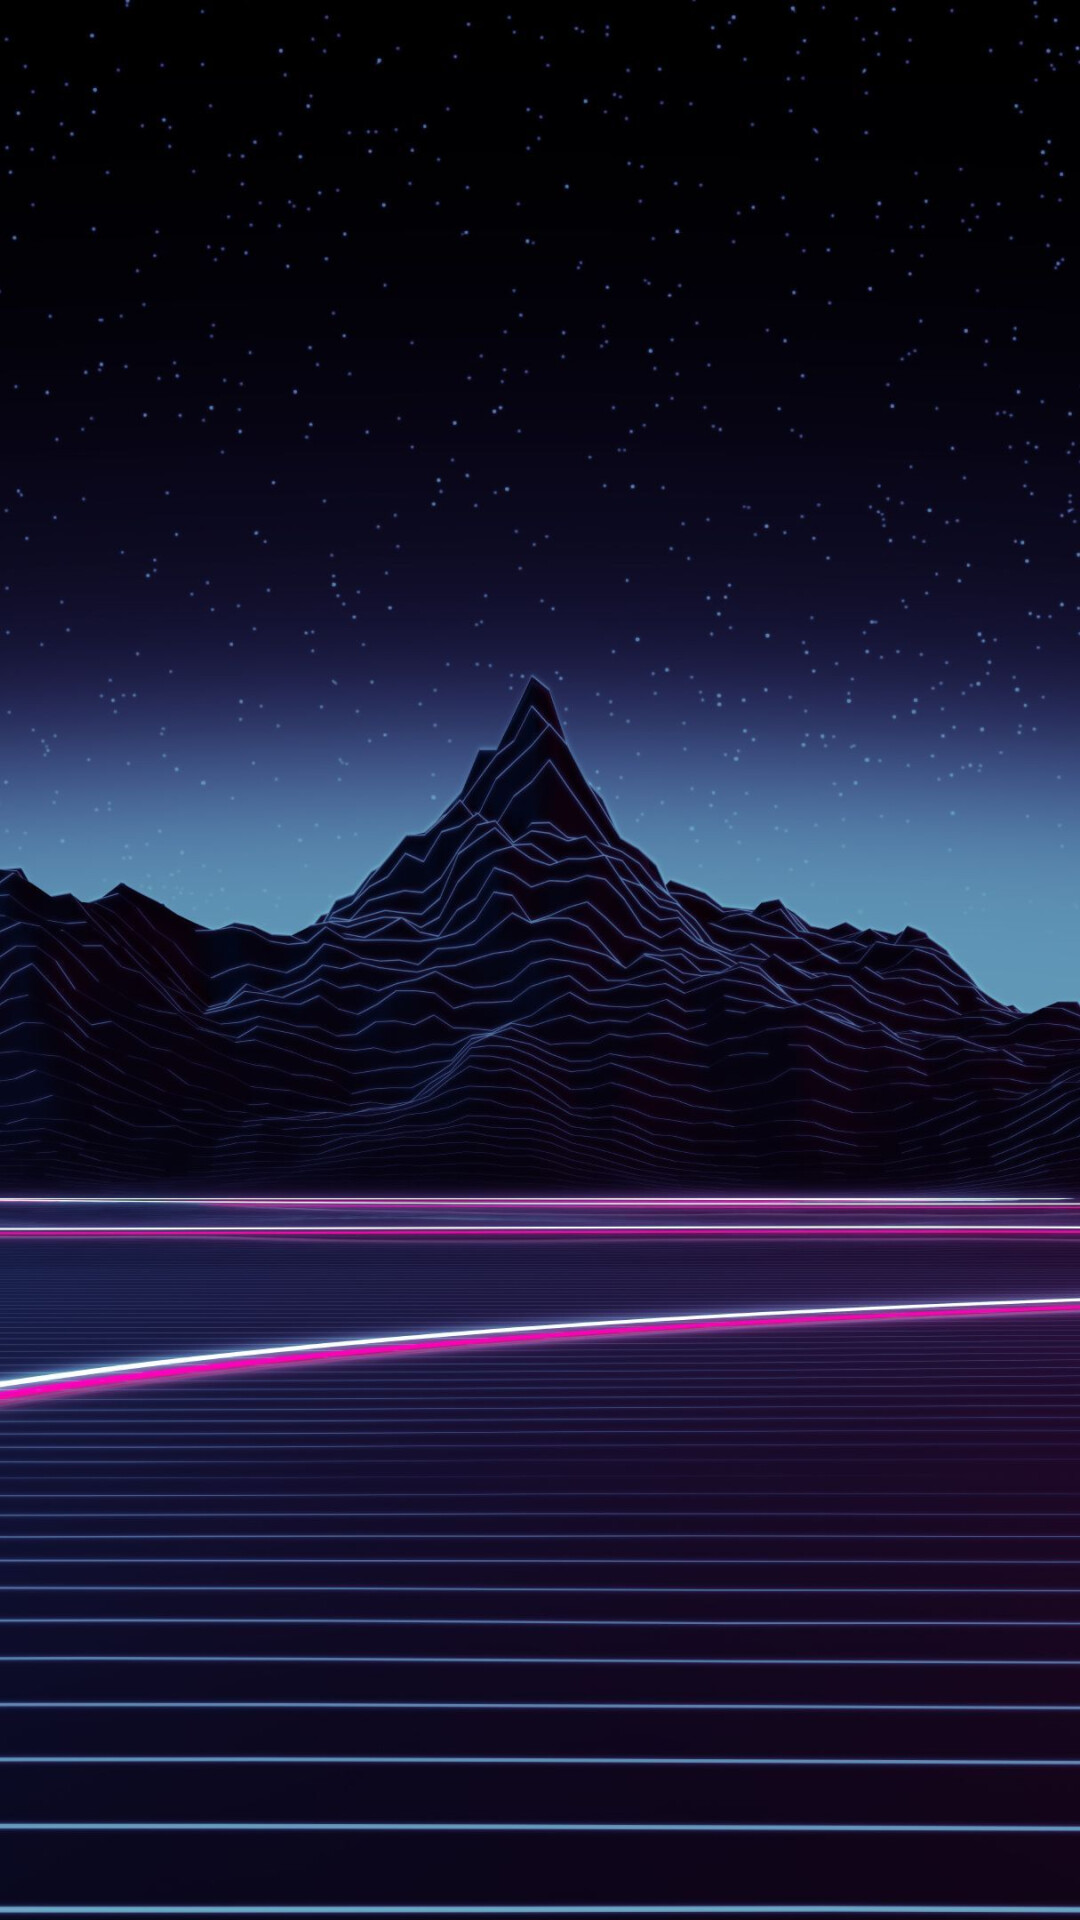 Glow in the Dark: Mountain, Neon glowing lines, Surreal landscape. 1080x1920 Full HD Background.